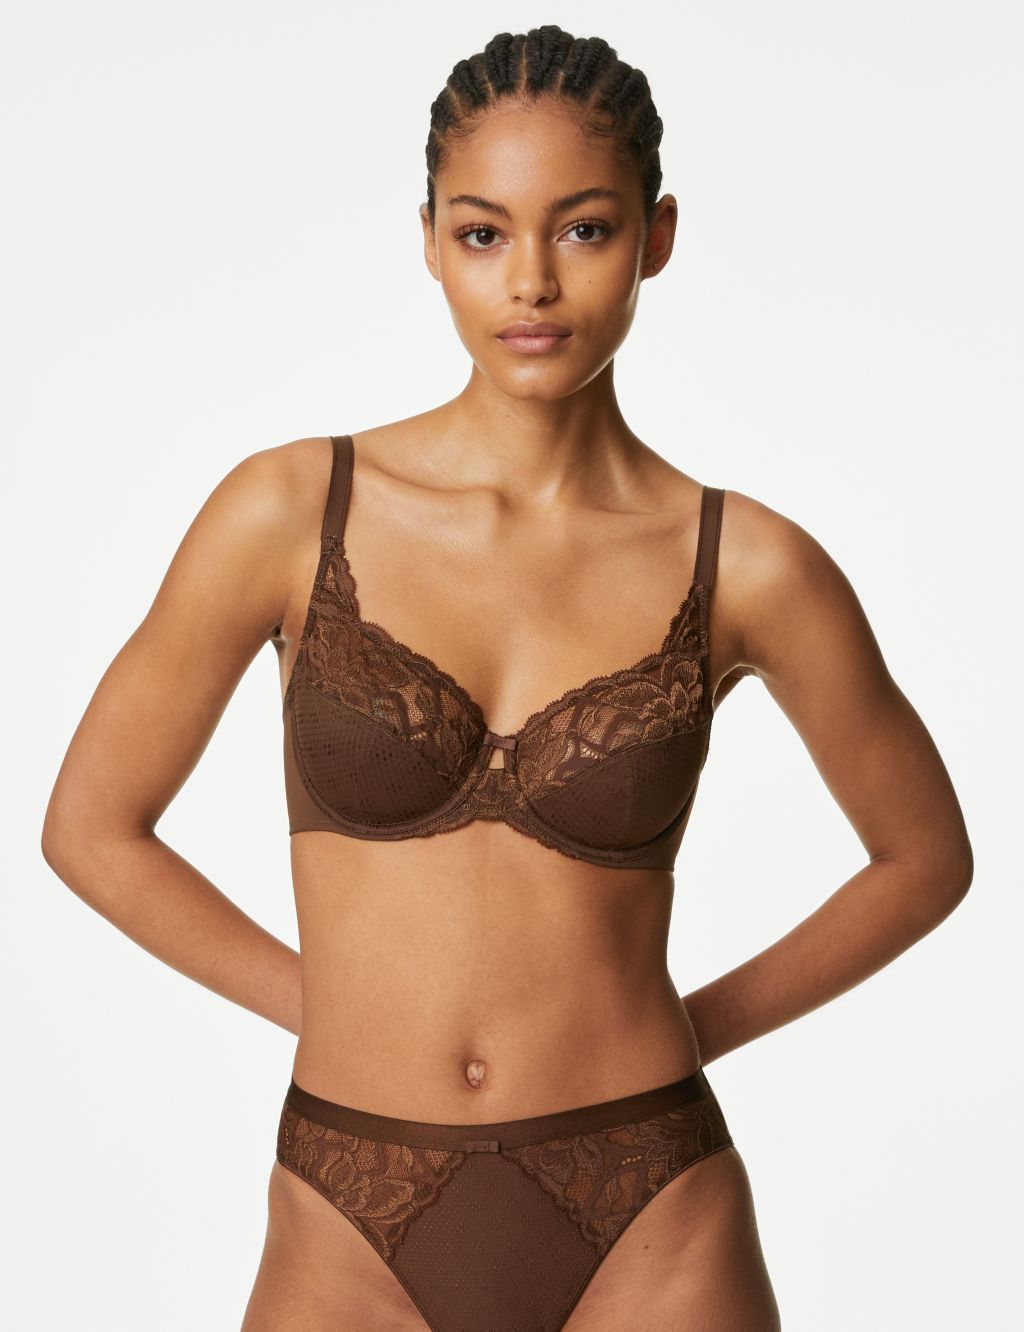 Wildblooms Wired Full Cup Bra A-E image 1